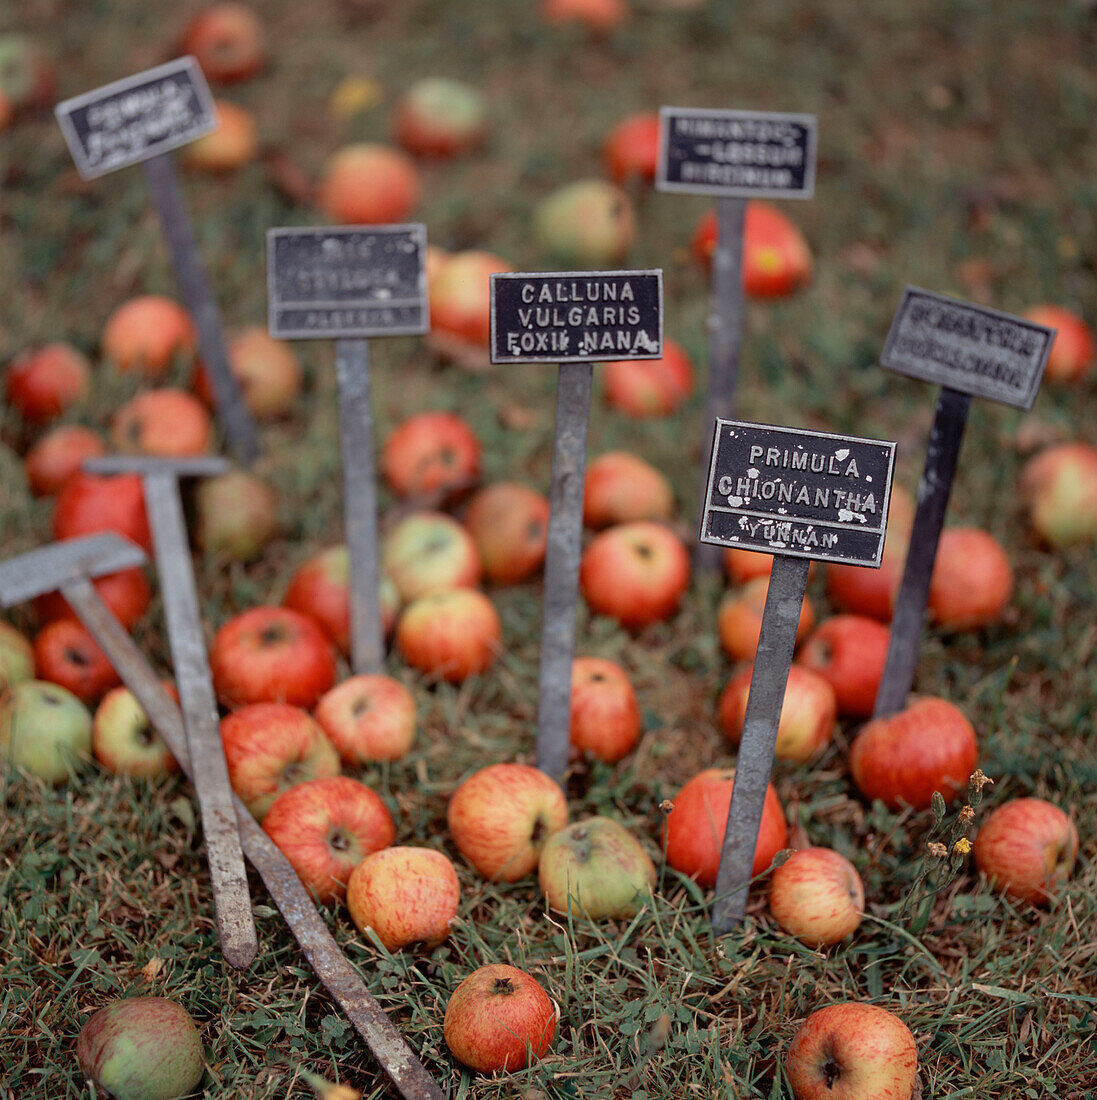 Group of fallen ripe apples on the grass with brand labels next to them in an orchard